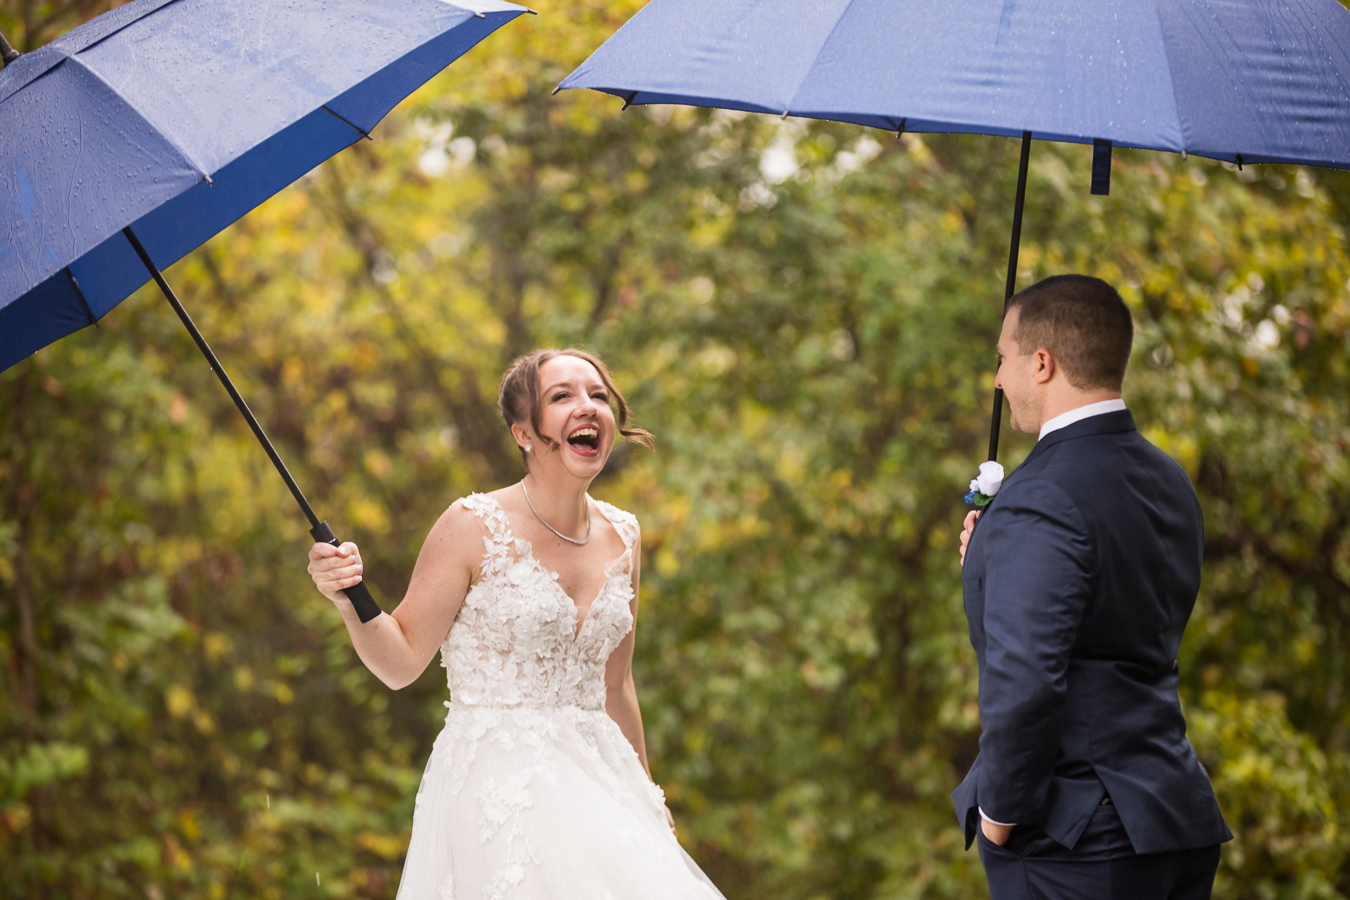 rainy day wedding first look captured by pa wedding photographer, lisa rhinehart, of the bride and groom as they smile and laugh at one another while holding large blue umbrellas during their Gettysburg battlefield first look 